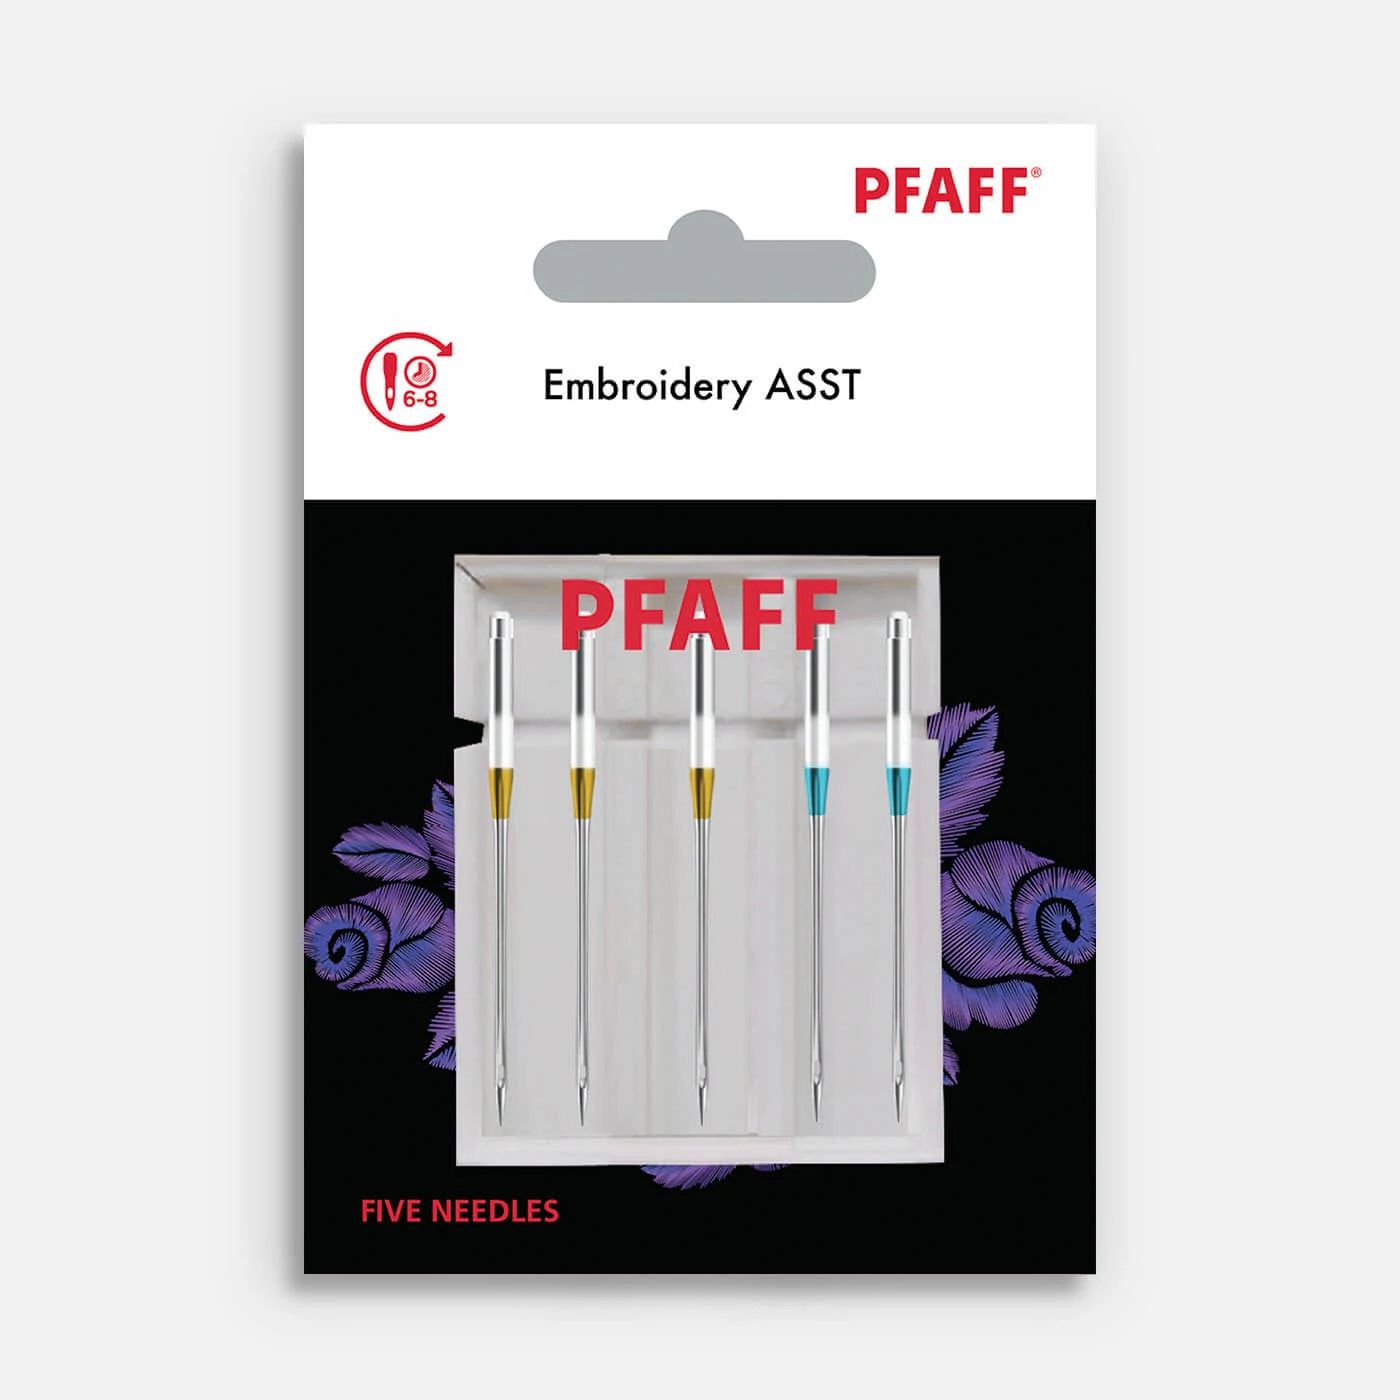 Pfaff Embroidery Sewing Machine Needles with Embroidery Point for  decoritive stitching